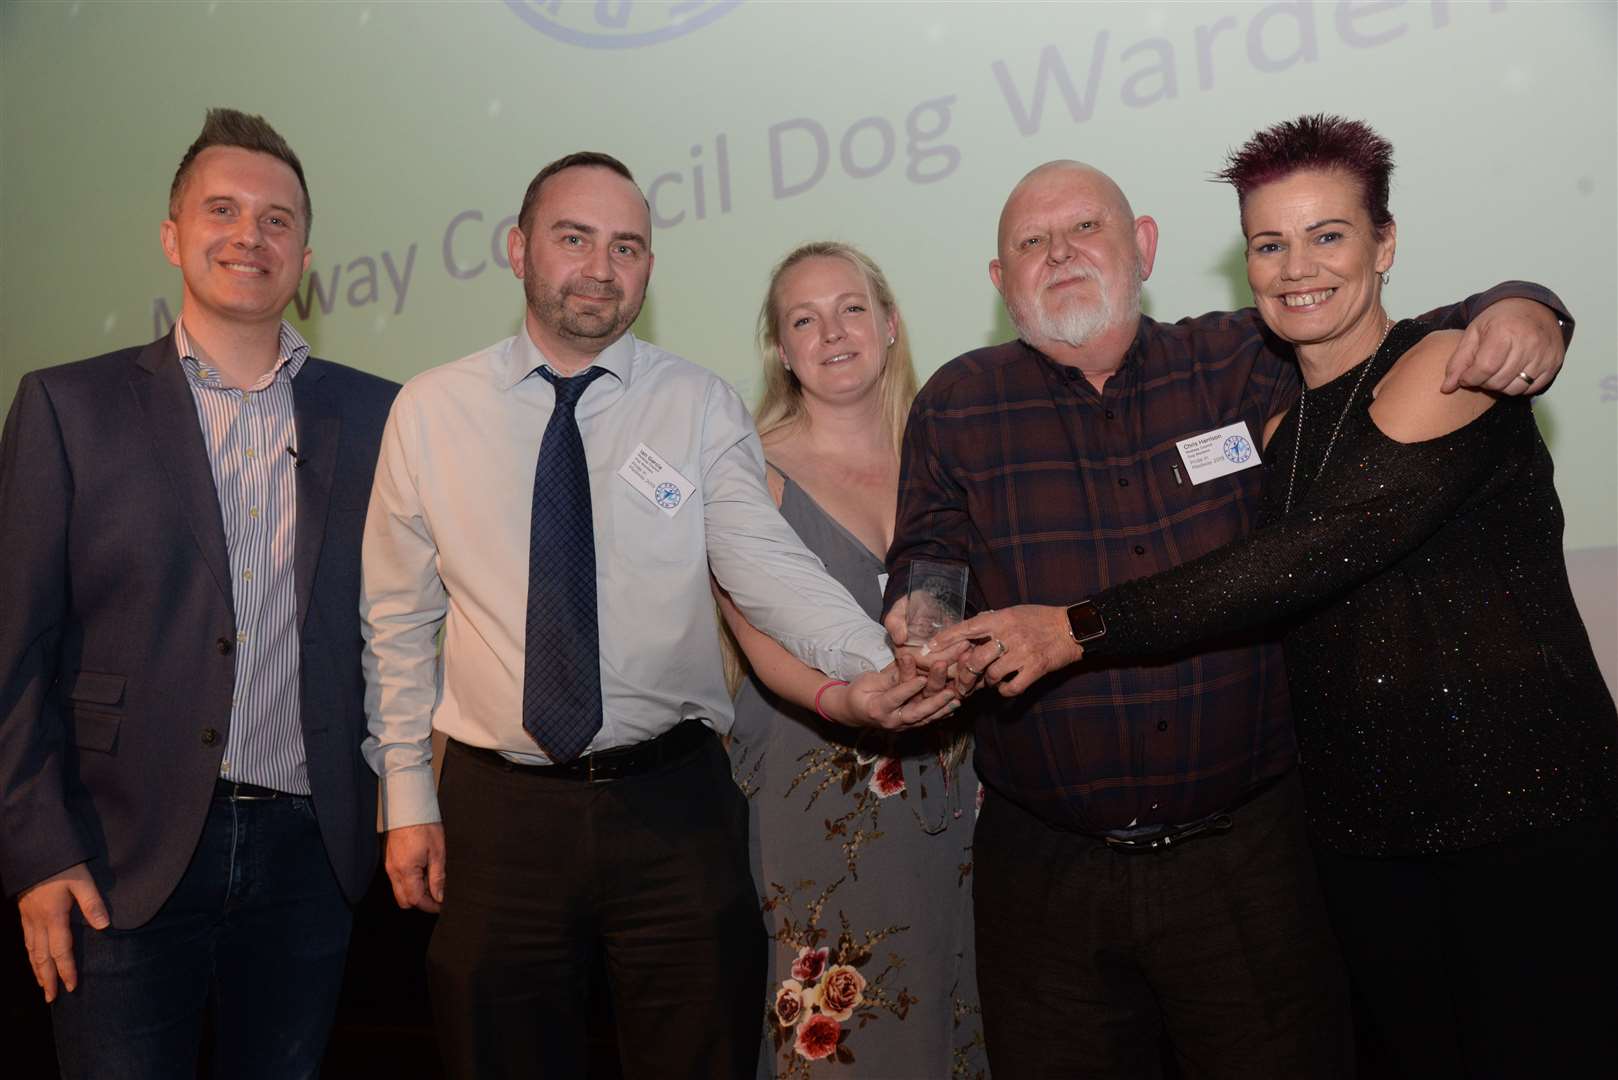 Medway Council Dog Wardens have been nomninated for a Pride in Medway Award after making it to the final last year. Picture: Chris Davey (8473732)